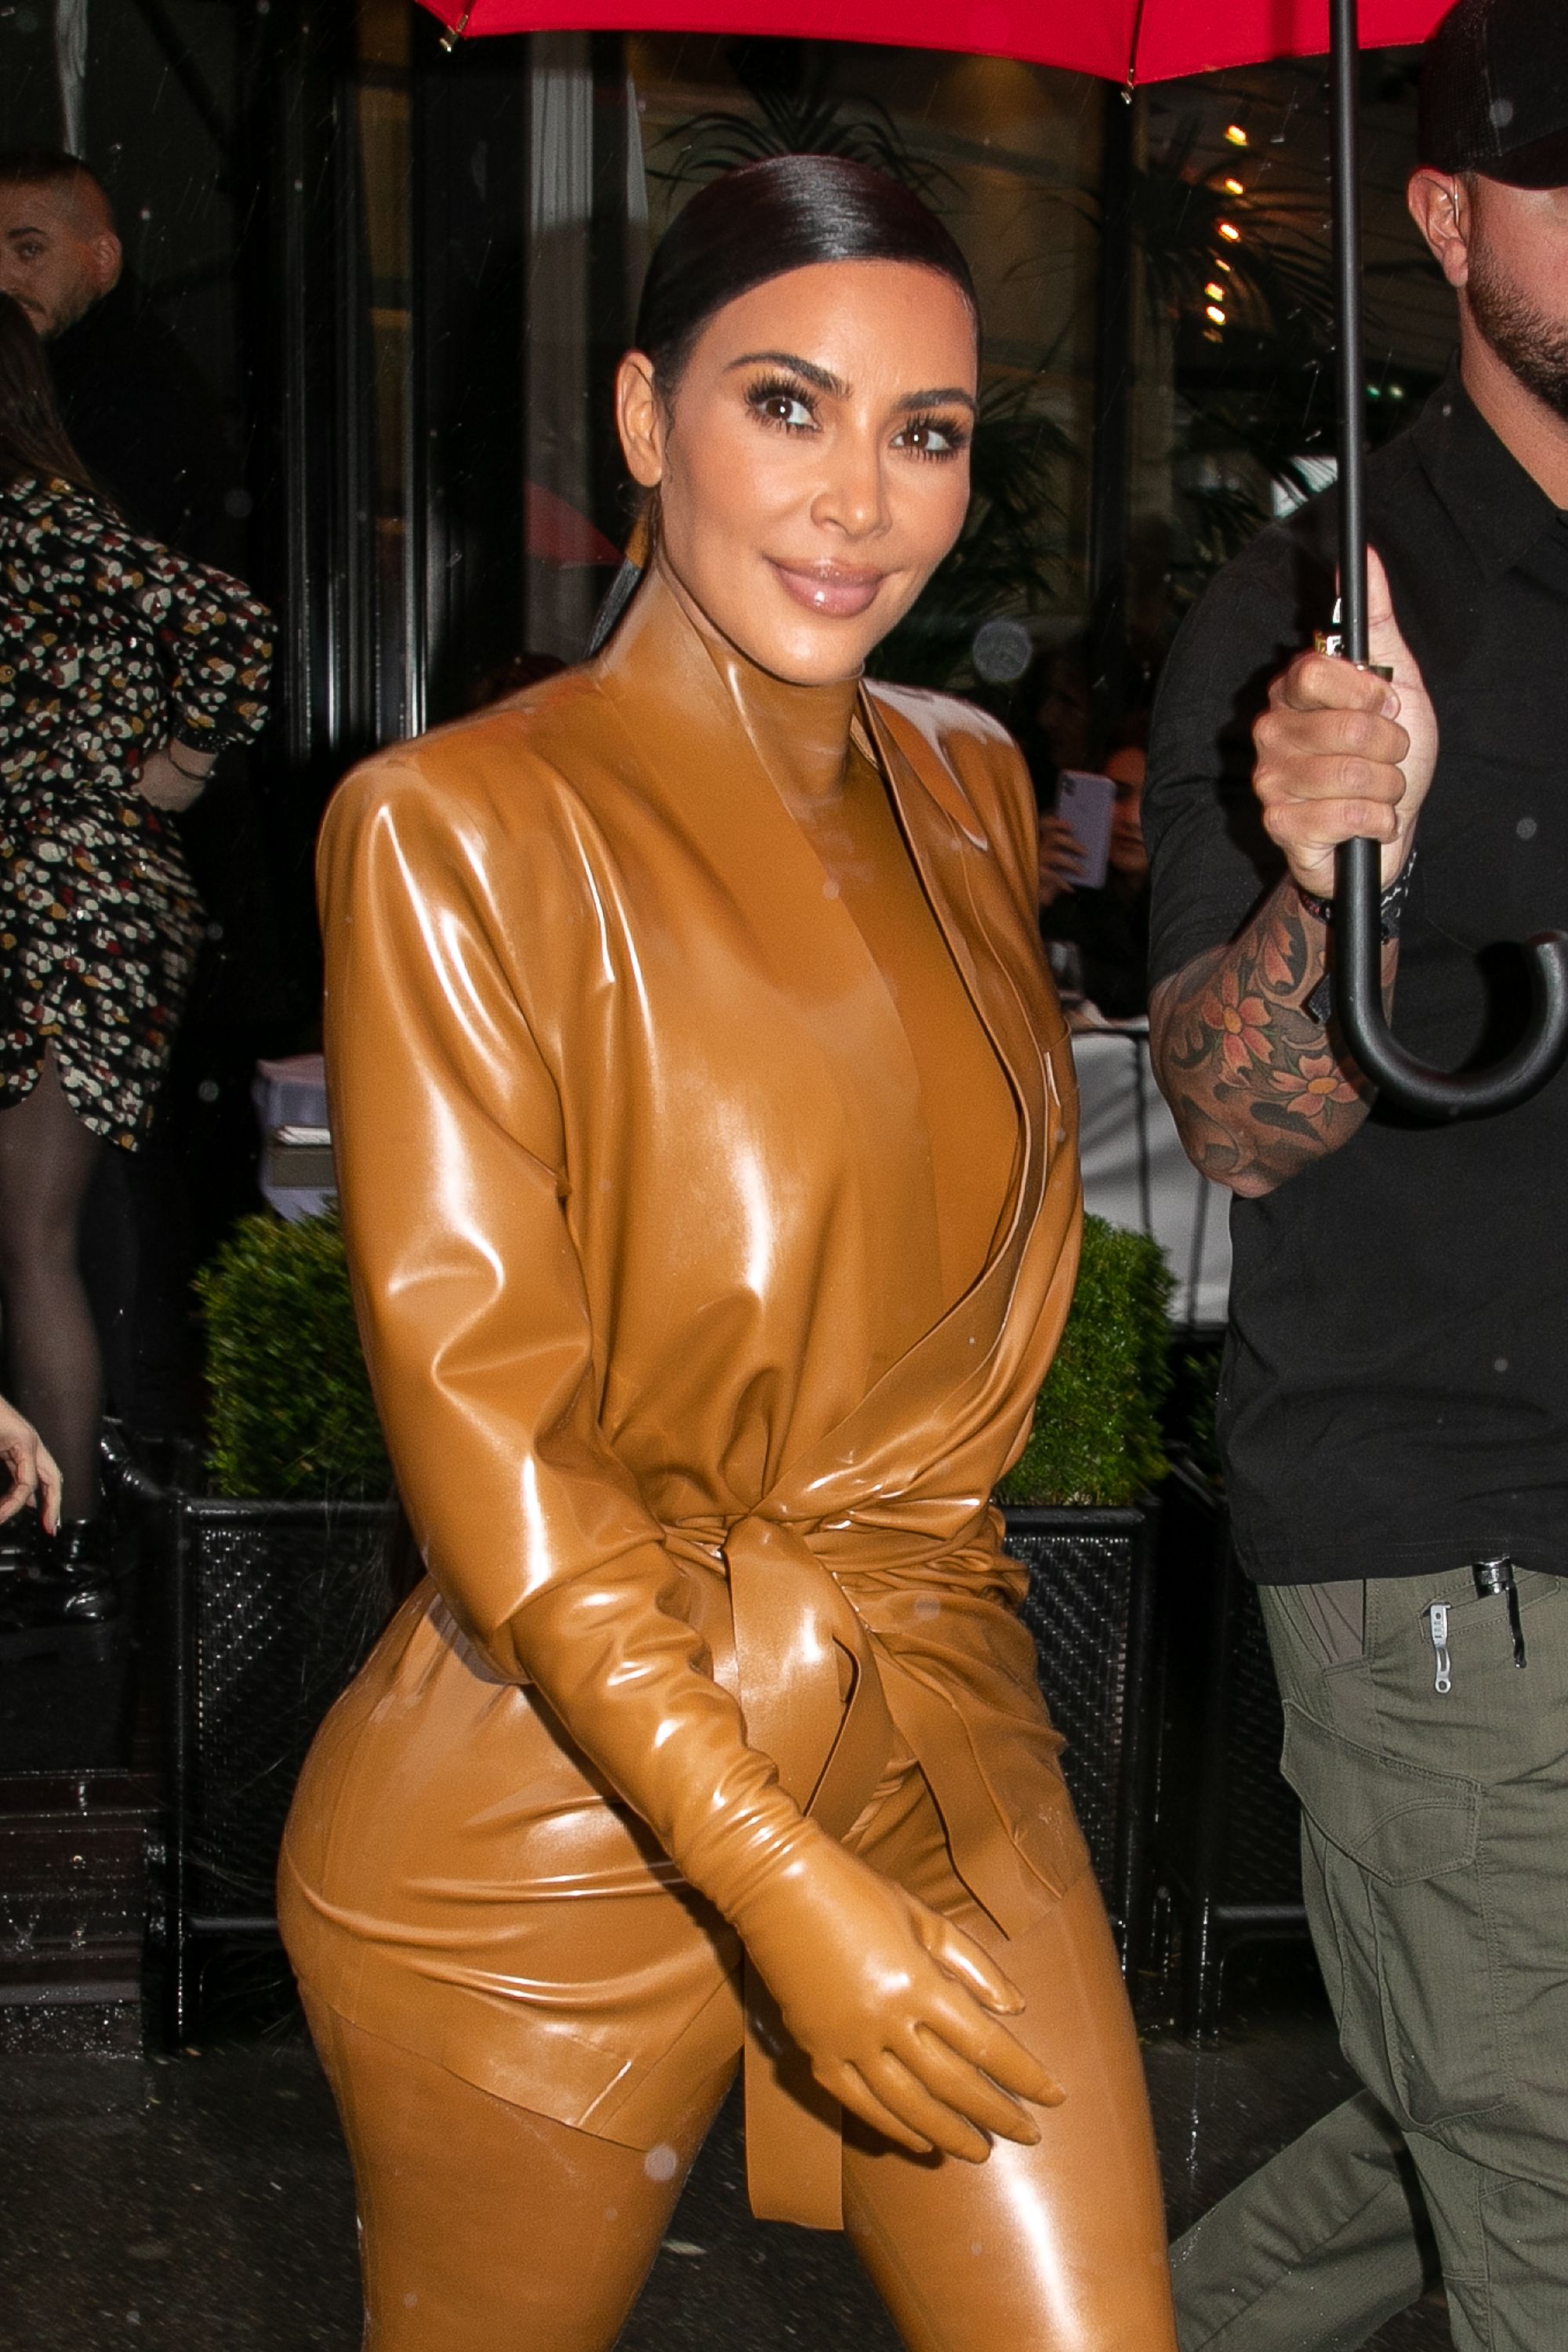 Kim Kardashian West leaving the L'Avenue restaurant on March 01, 2020, in Paris, France | Photo: Getty Images